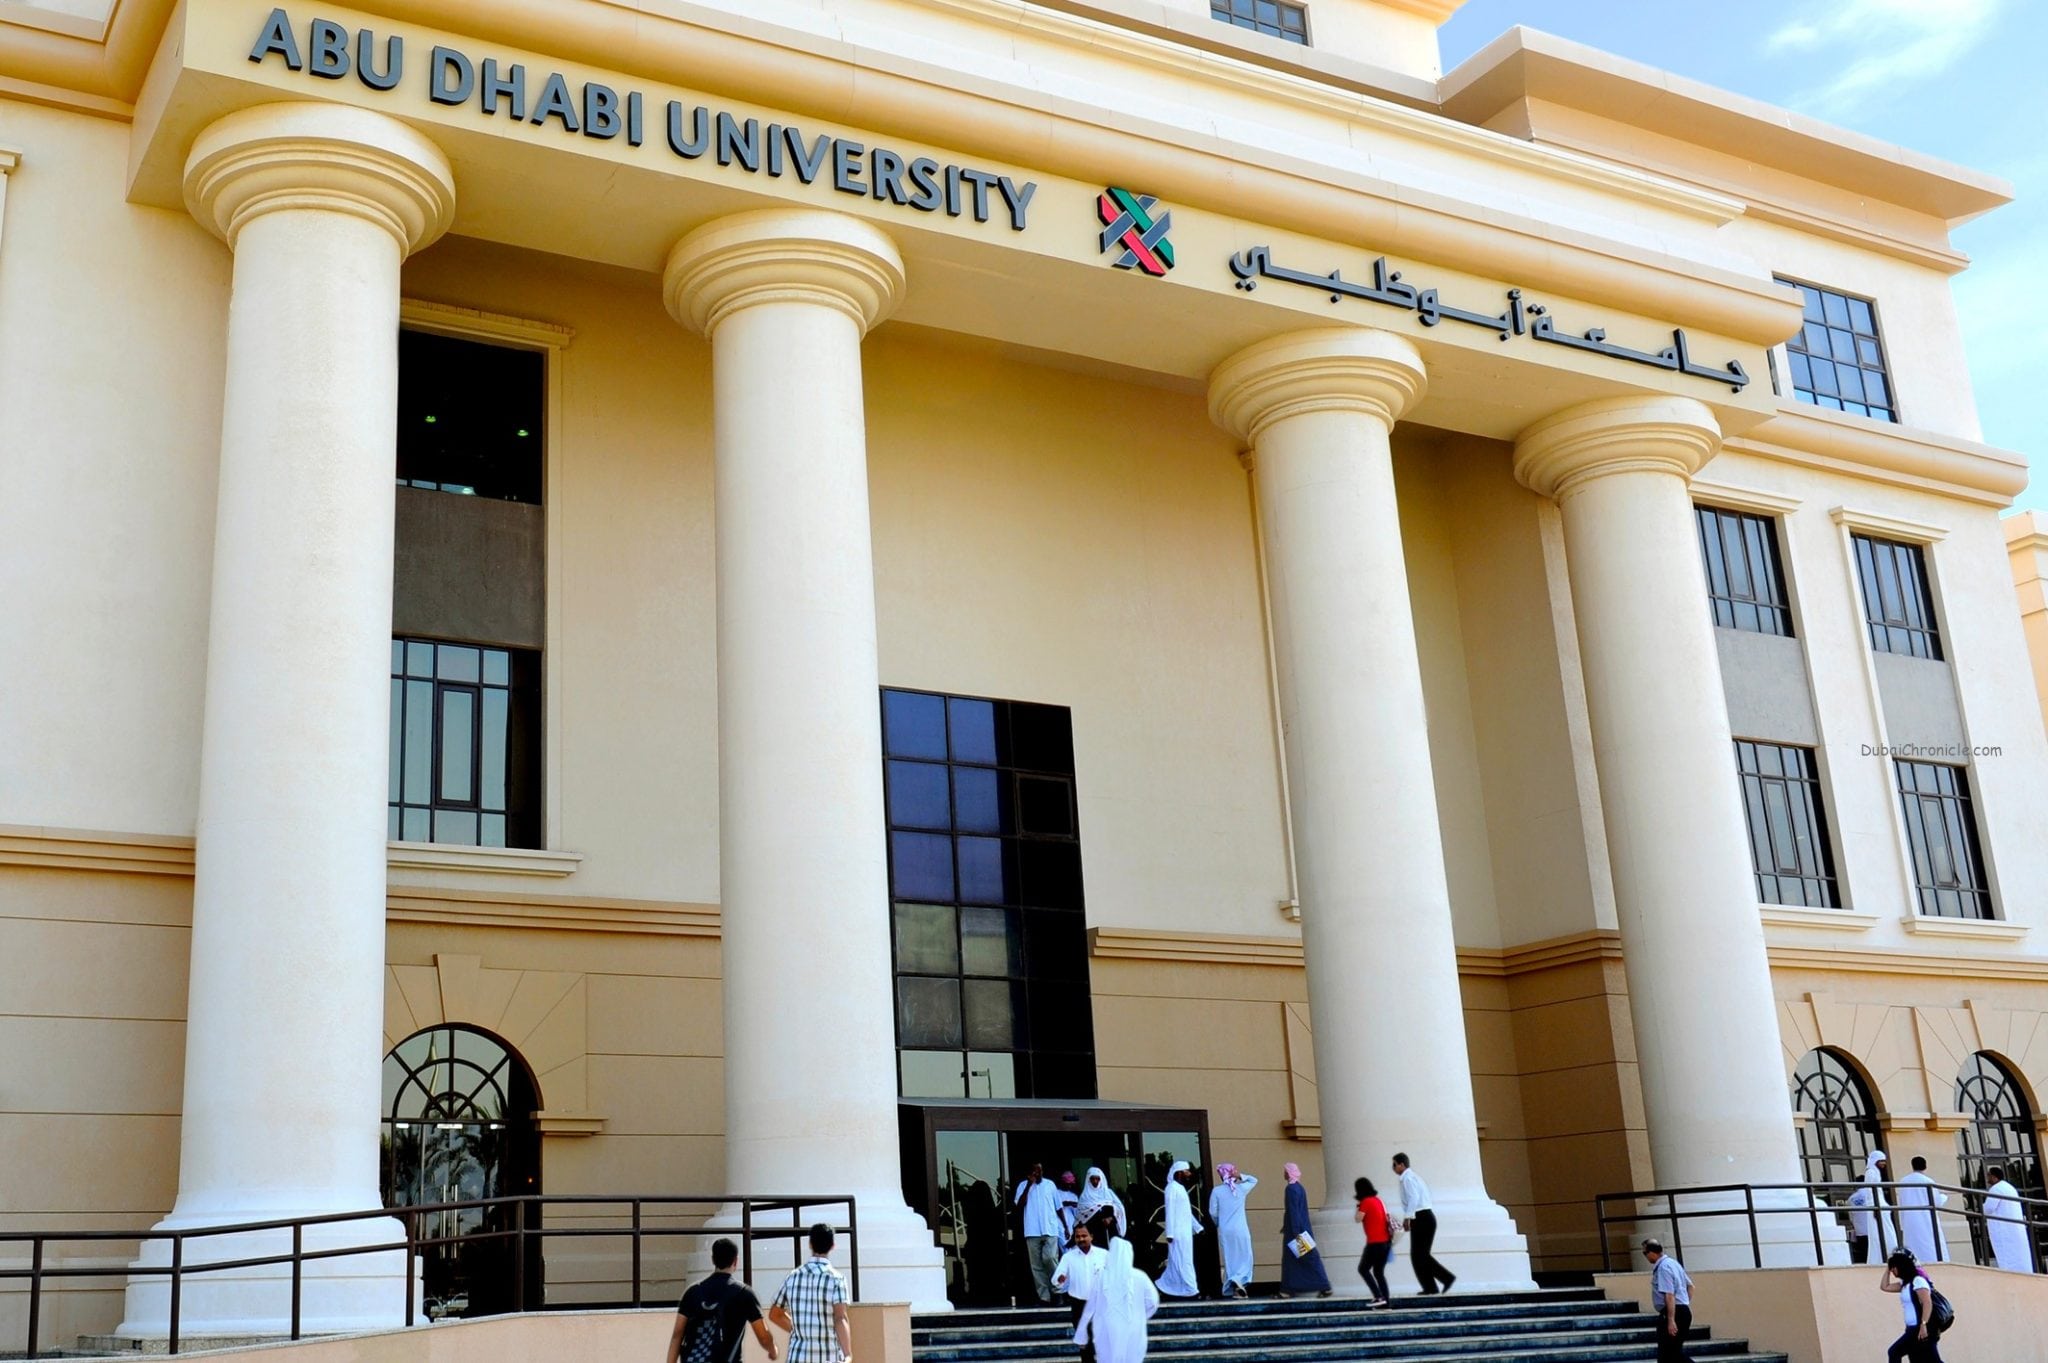 Students in UAE have the highest salary expectations in the world